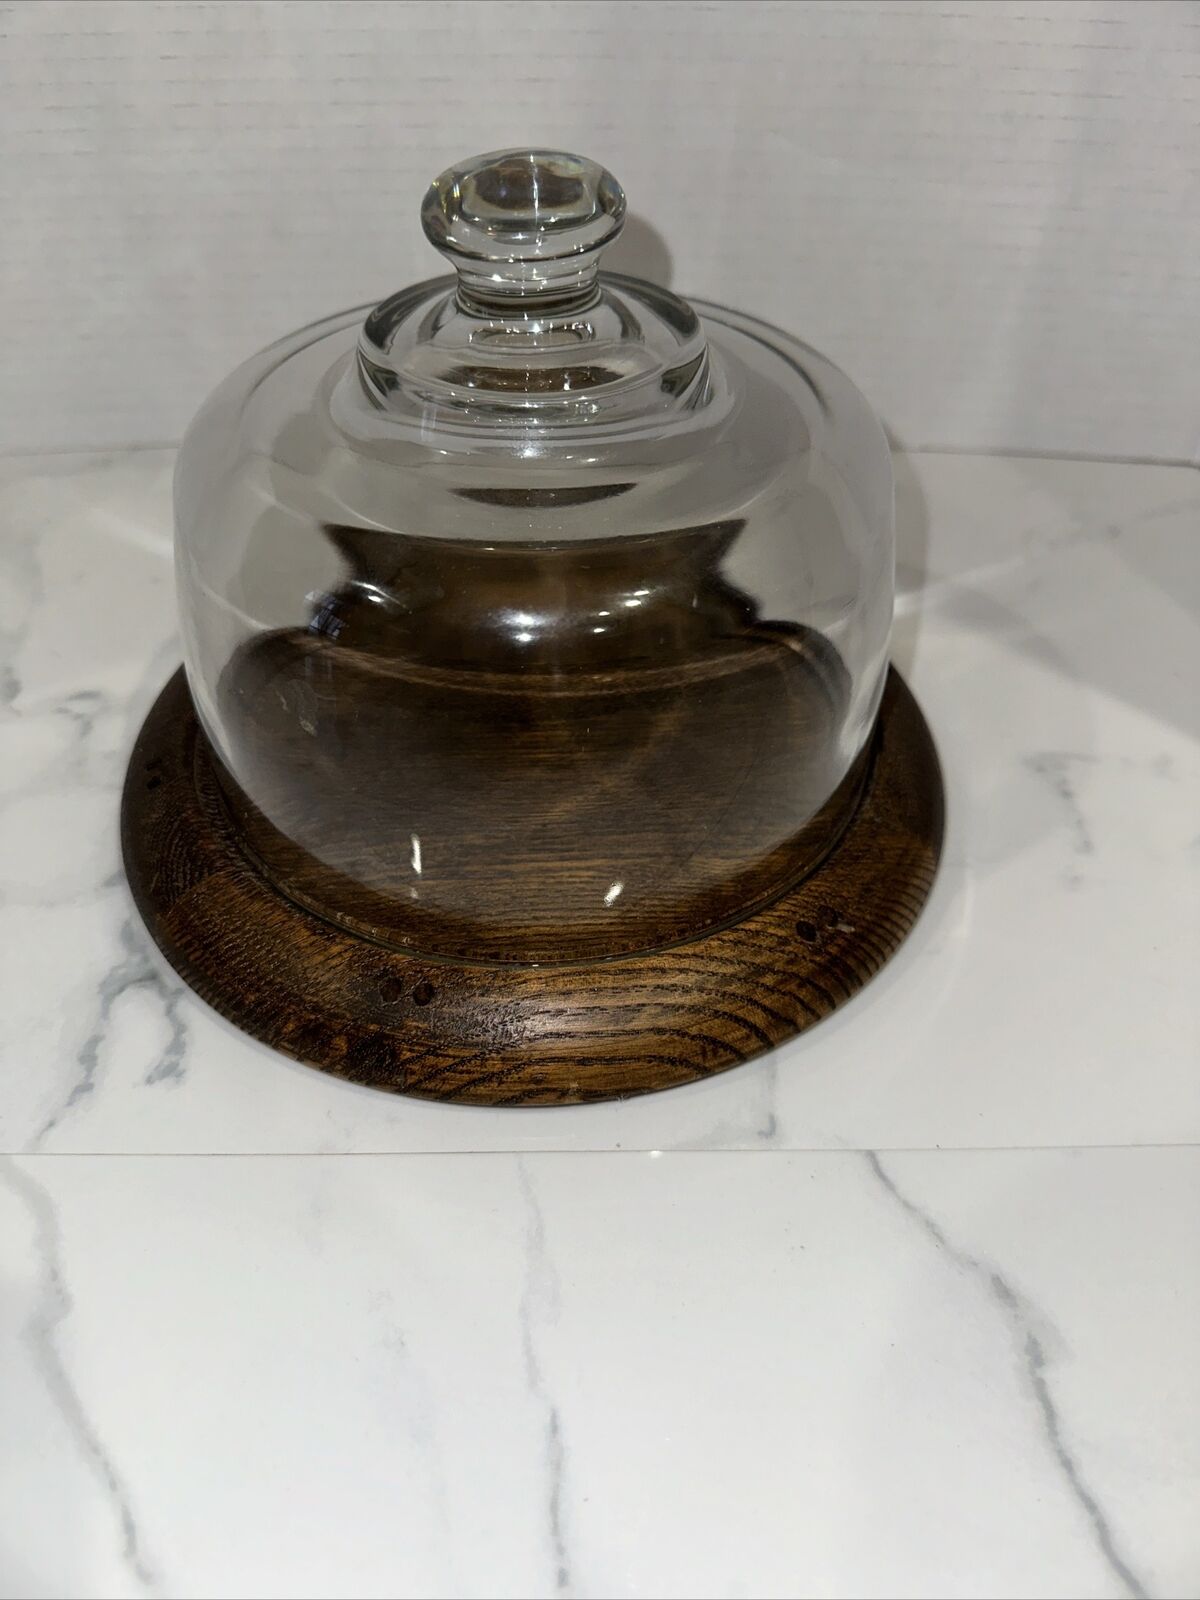 VINTAGE GLASS CLOCHE WITH WOODEN BASE DOME CHEESE BOARD OR DECOR Appx 7x7 Inches